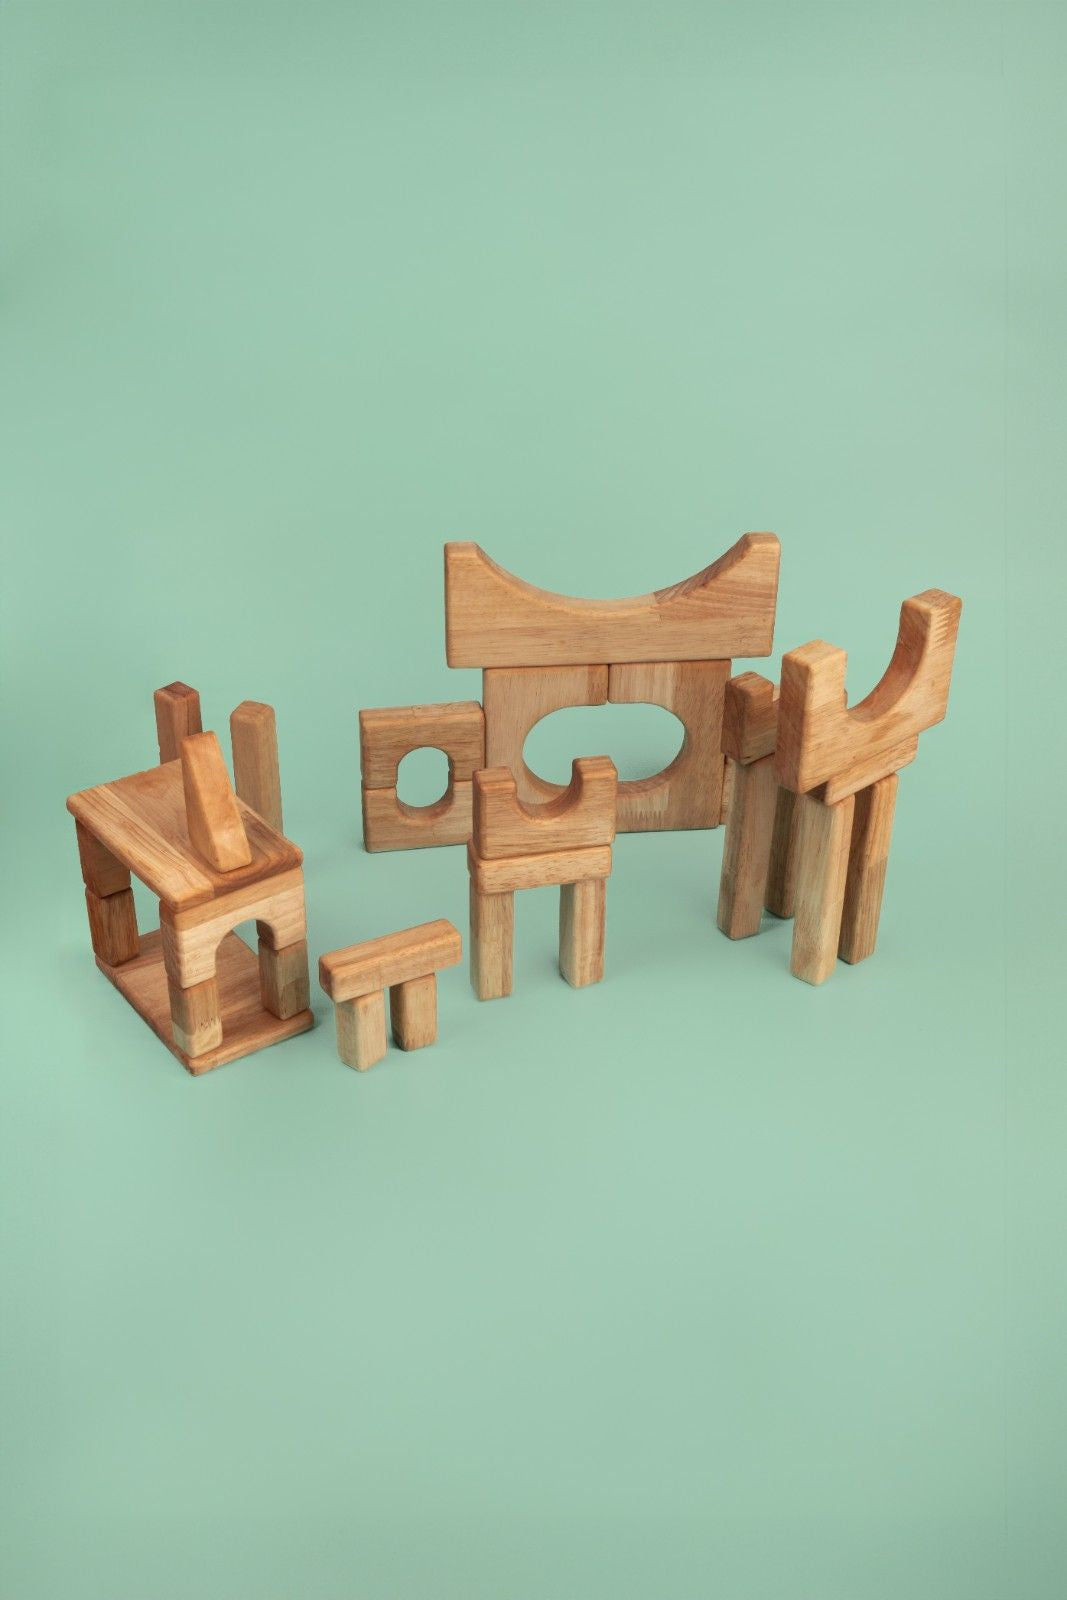 Wooden Toys for Emotional Regulation: Supporting Children in Managing Stress and Anxiety